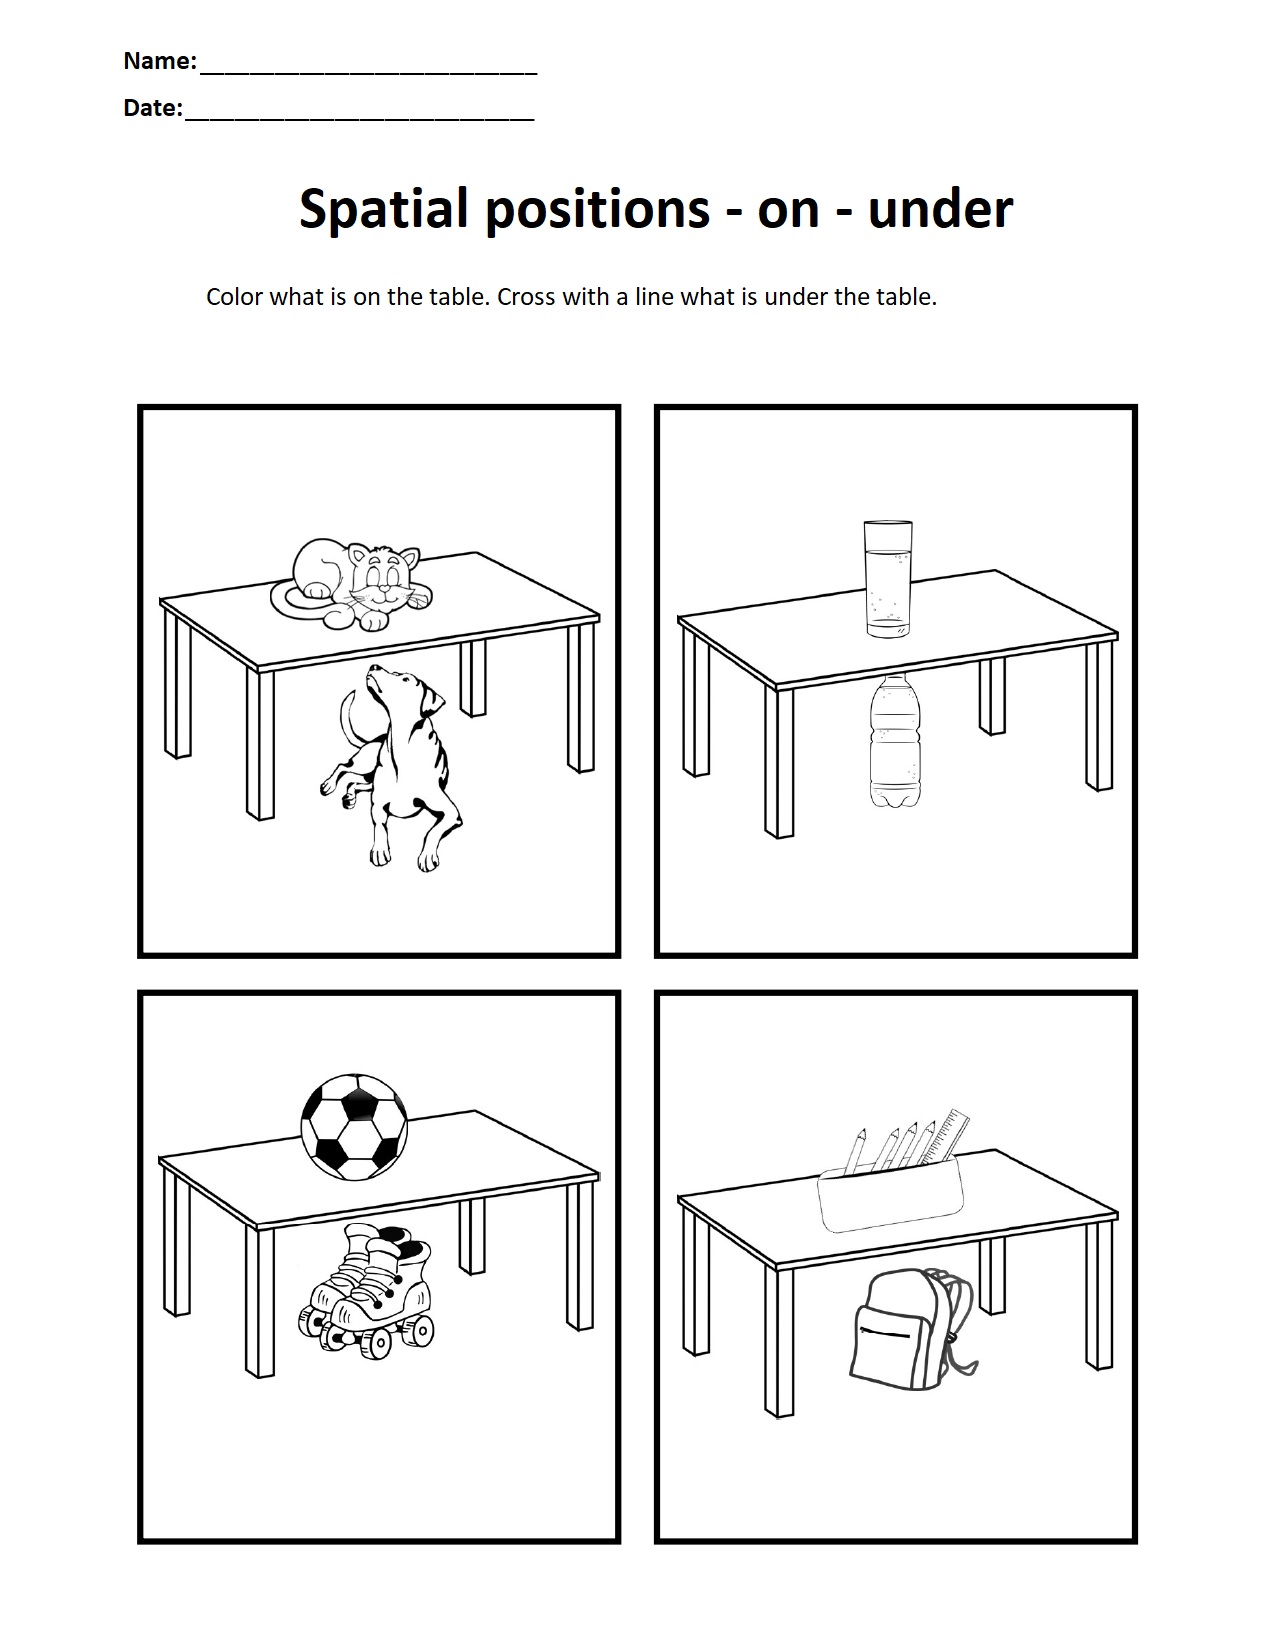 Spatial Positions - on - under.jpg